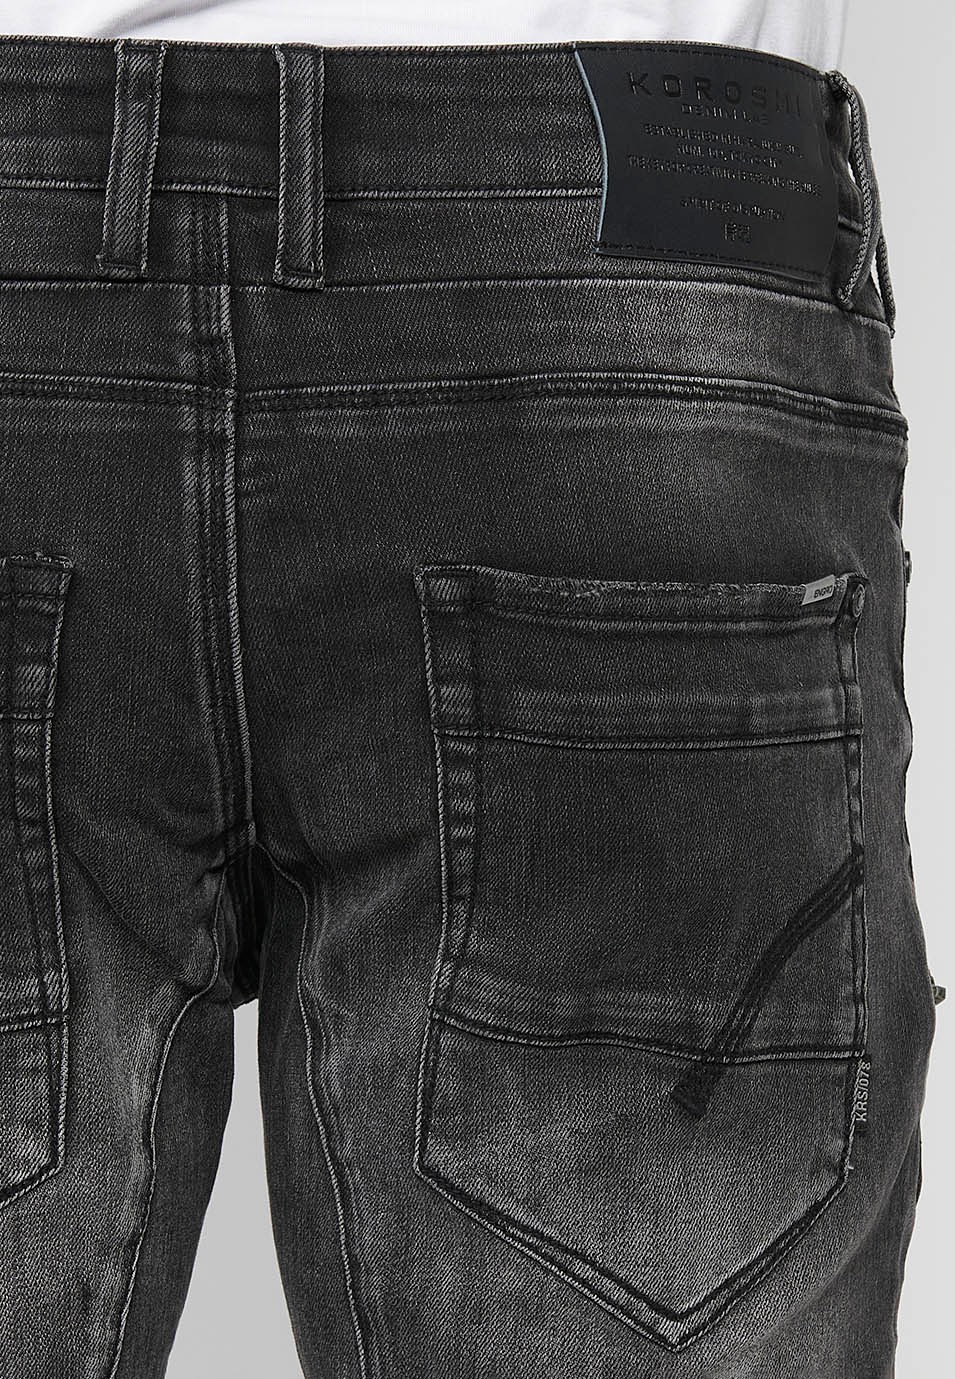 Long denim pants with front closure with zipper and button and pockets, two sides in Black for Men 8